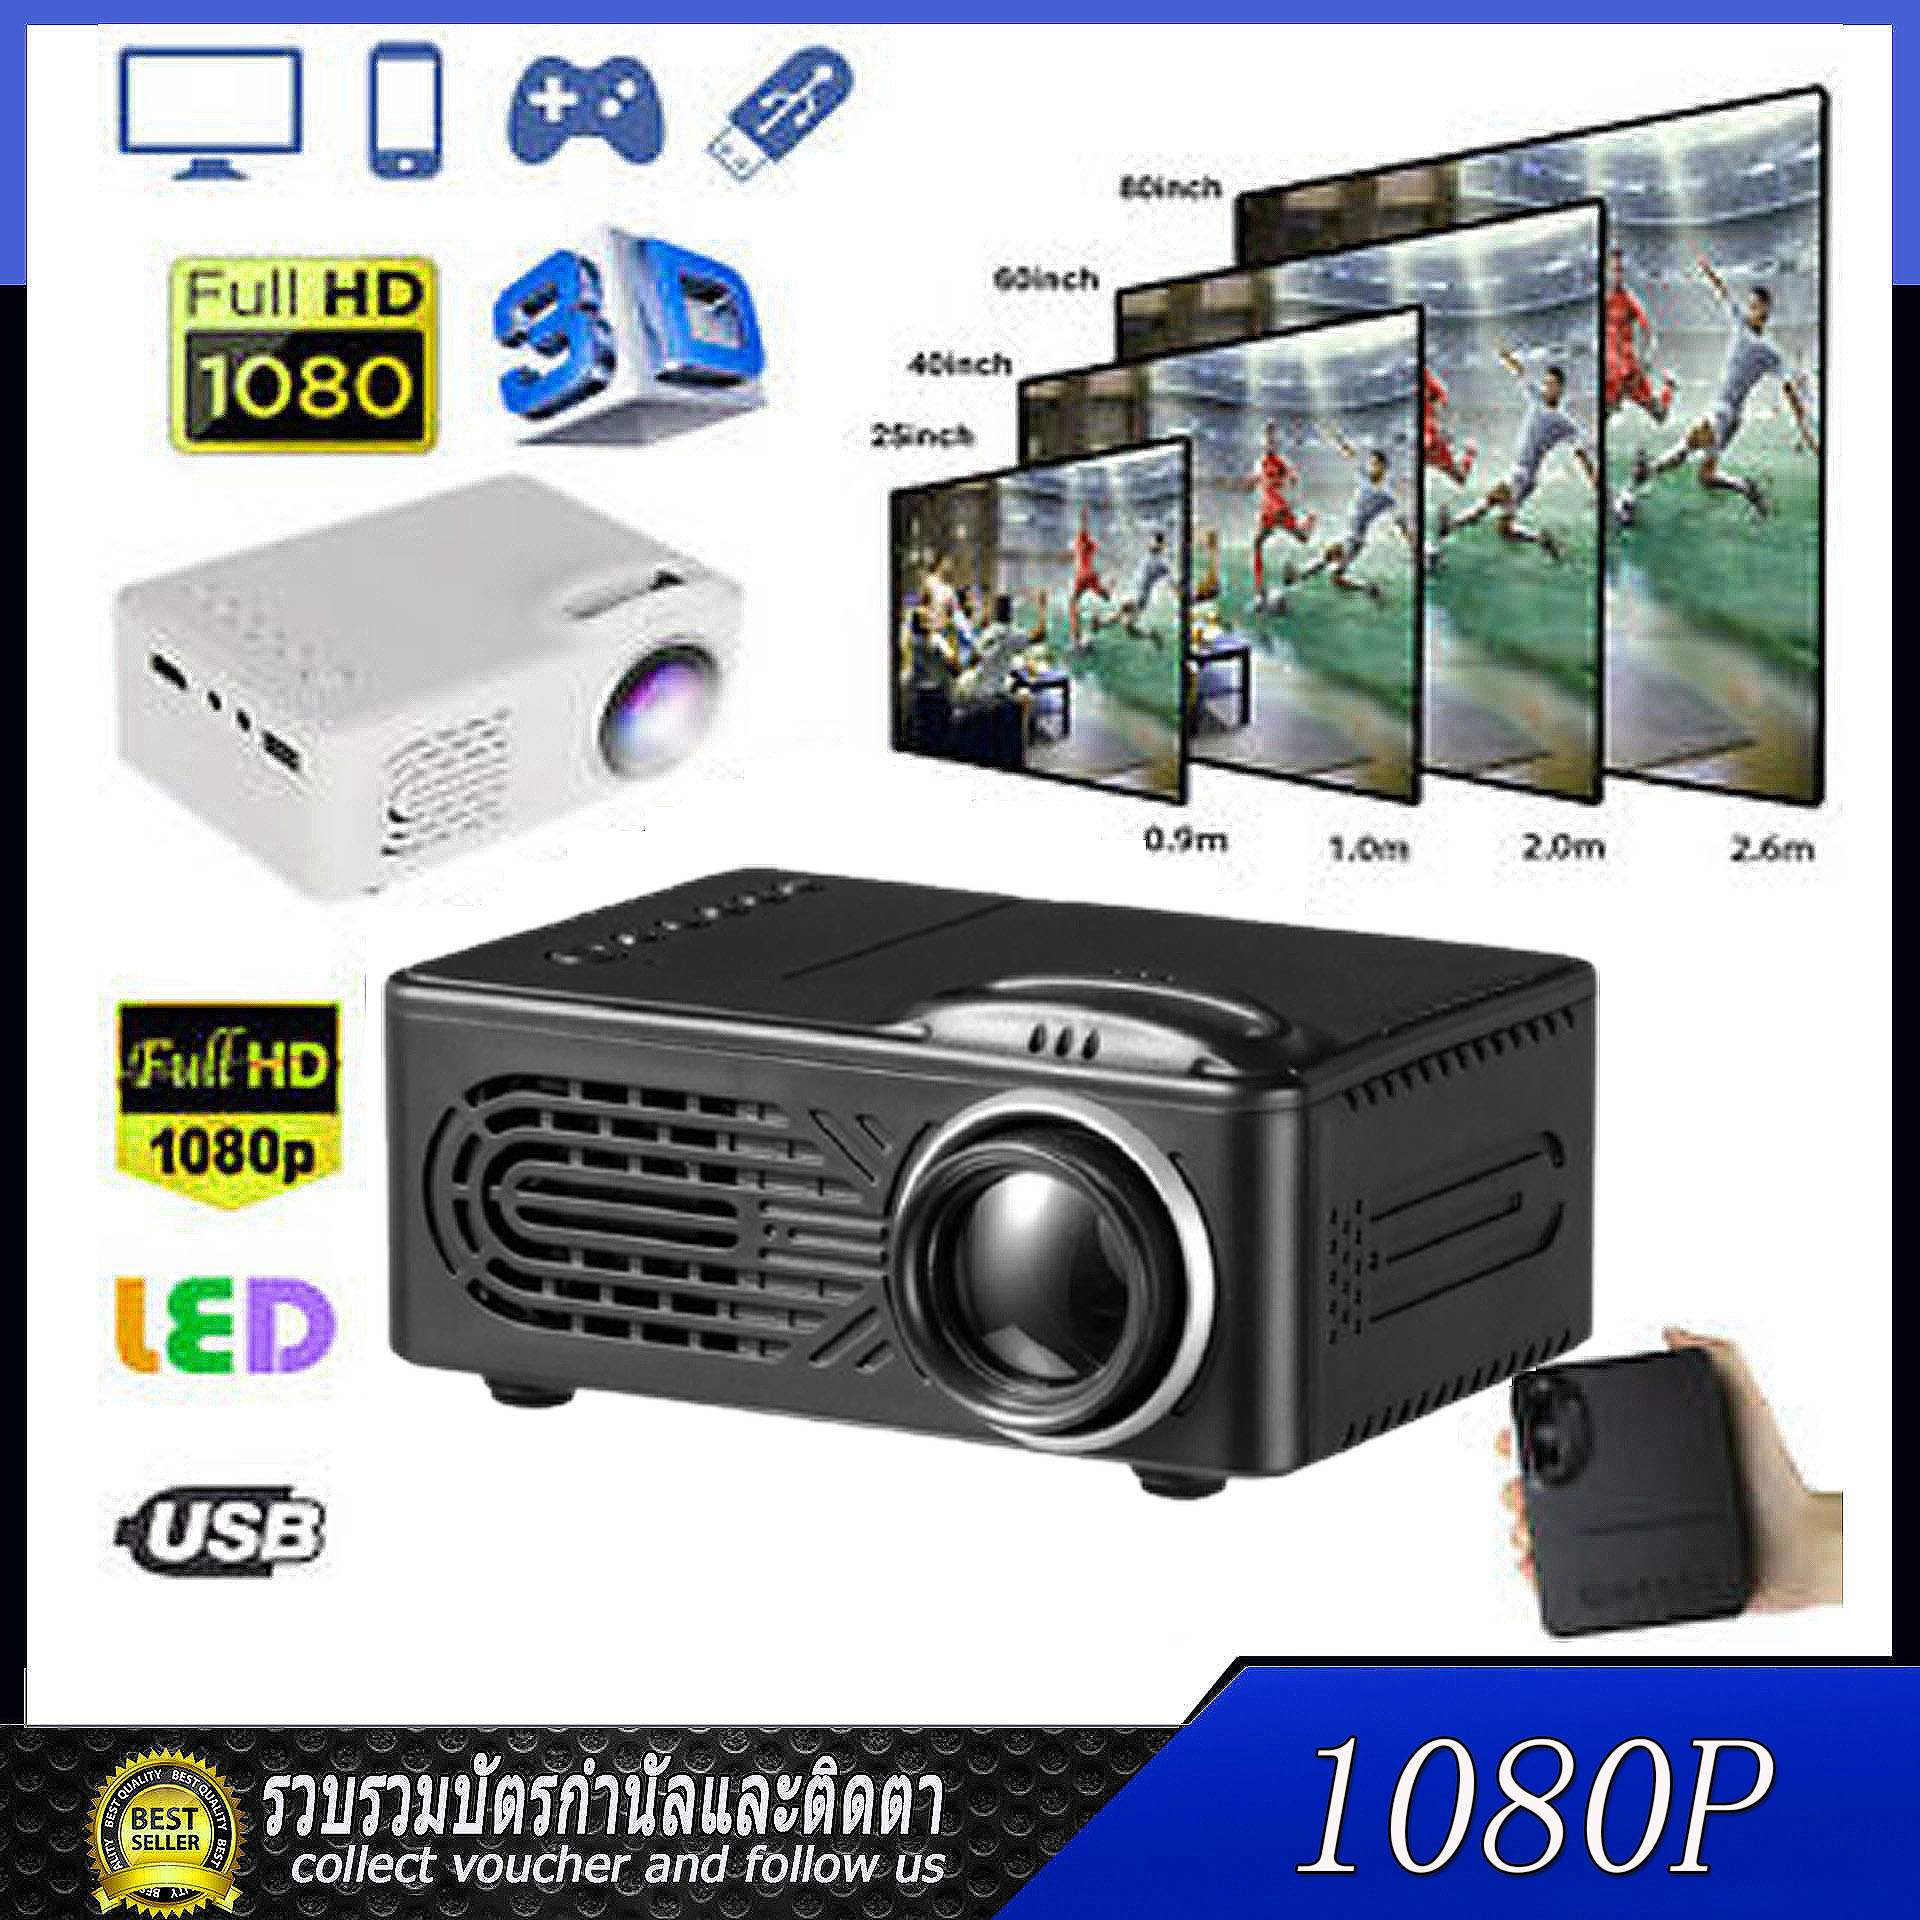 [Free shipping+Ready stock]MINI LED Projector G08 1920*1080P 3000 Lumens Android WIFI Projector สำหรับรองรับโทรศัพท์ 4K 3D Home Video Beamer Projector